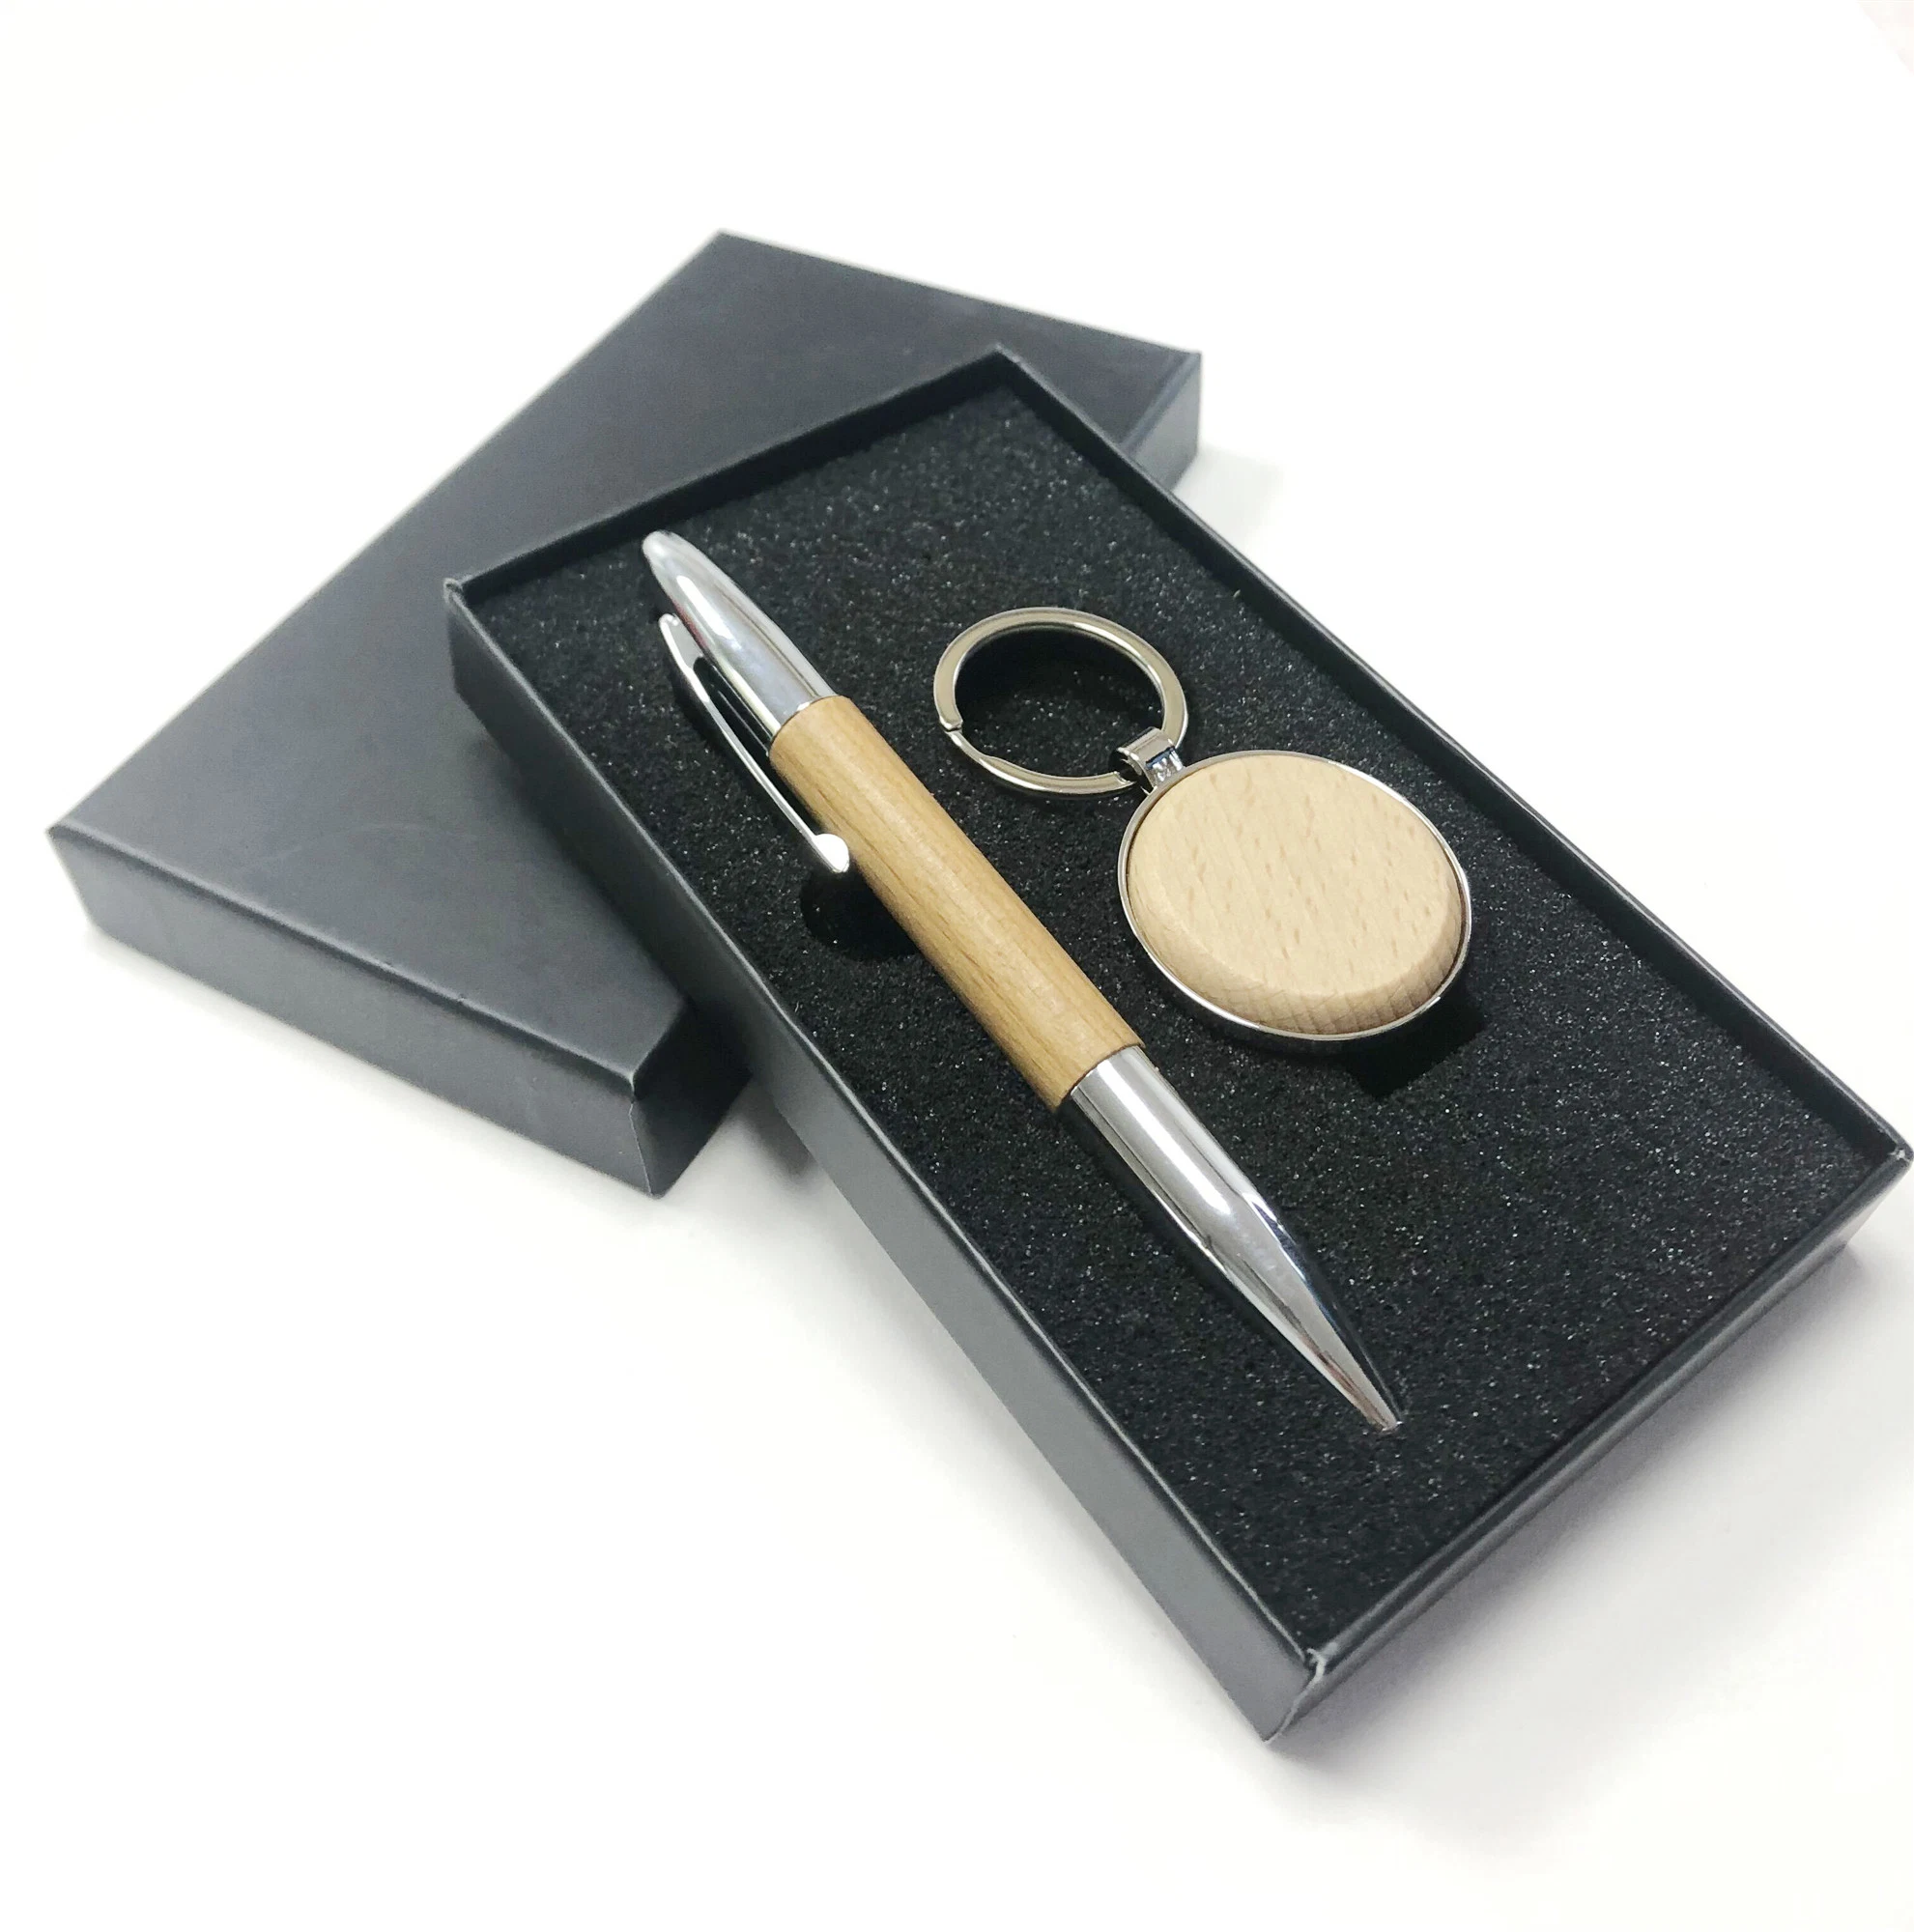 Hot Sale Product Metal Zinc Alloy Keychain and Pen Business Gift Set Wood Pen Wooden Keychains Laser Logo Luxury Corporate Men Gift Set